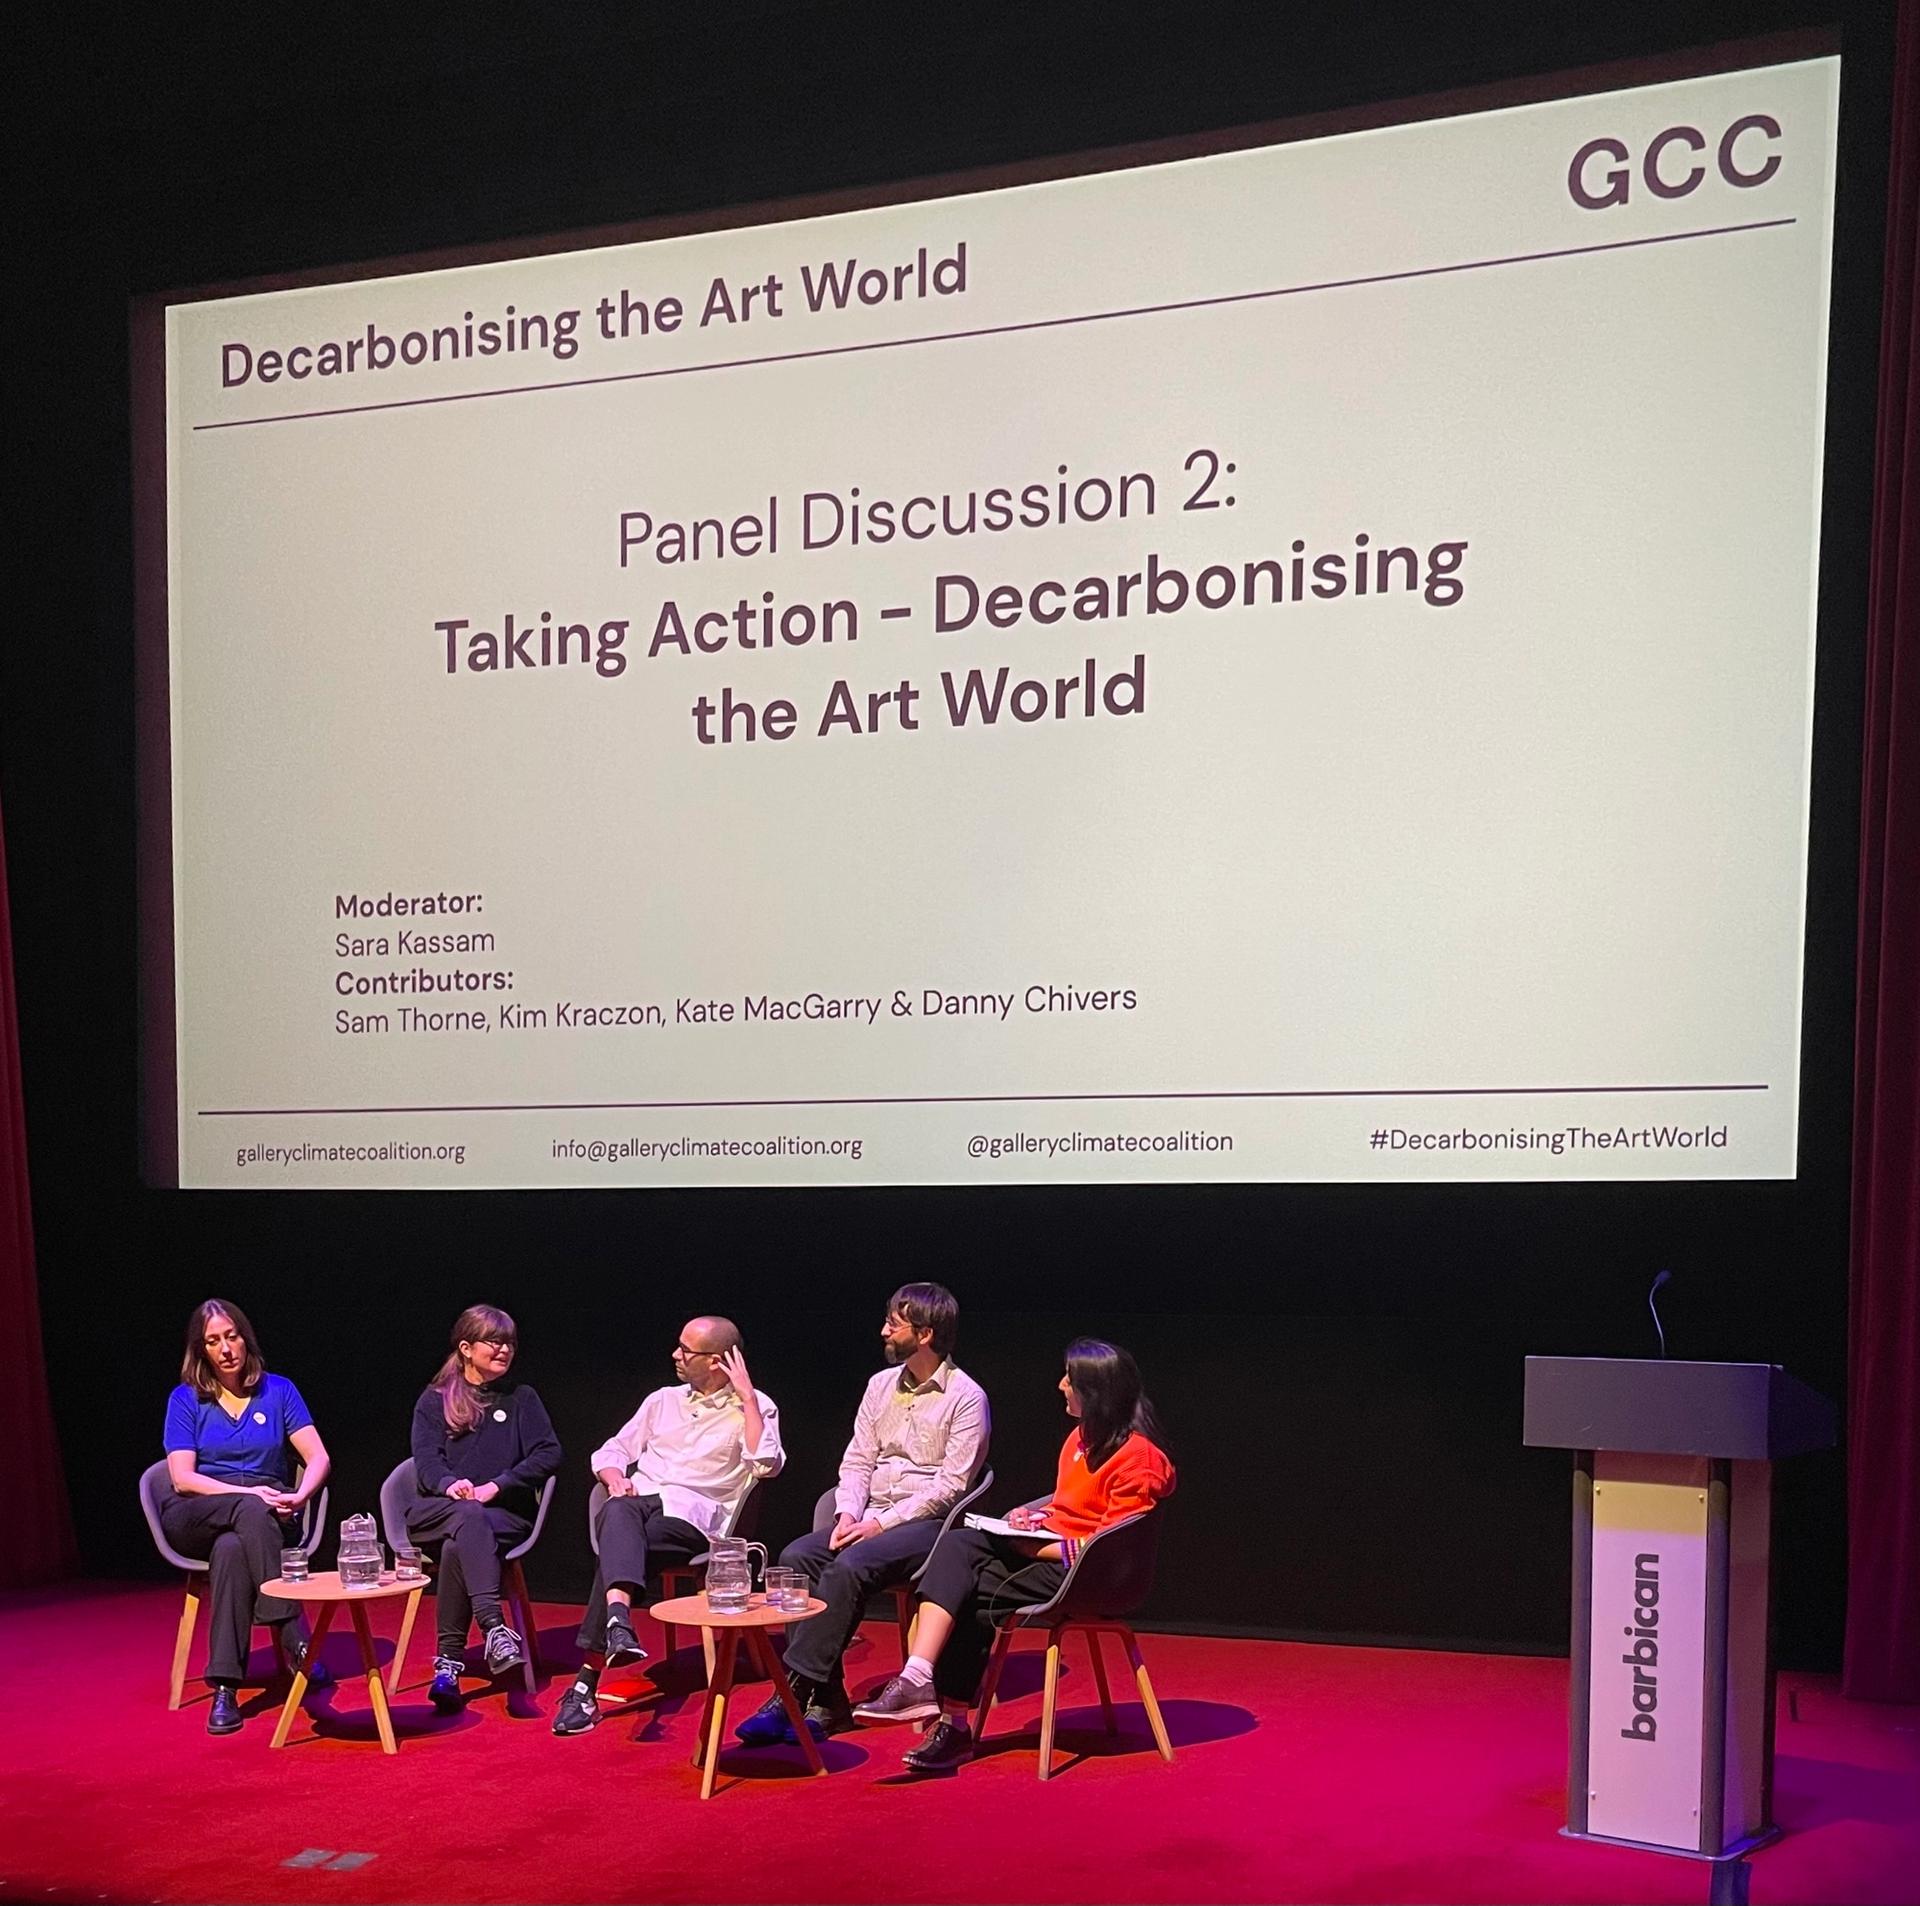 A panel at the Gallery Climate Coalition conference in London. From left to right: Kim Kraczon, Kate MacGarry, Sam Thorne, Danny Chivers, Sara Kassam. 